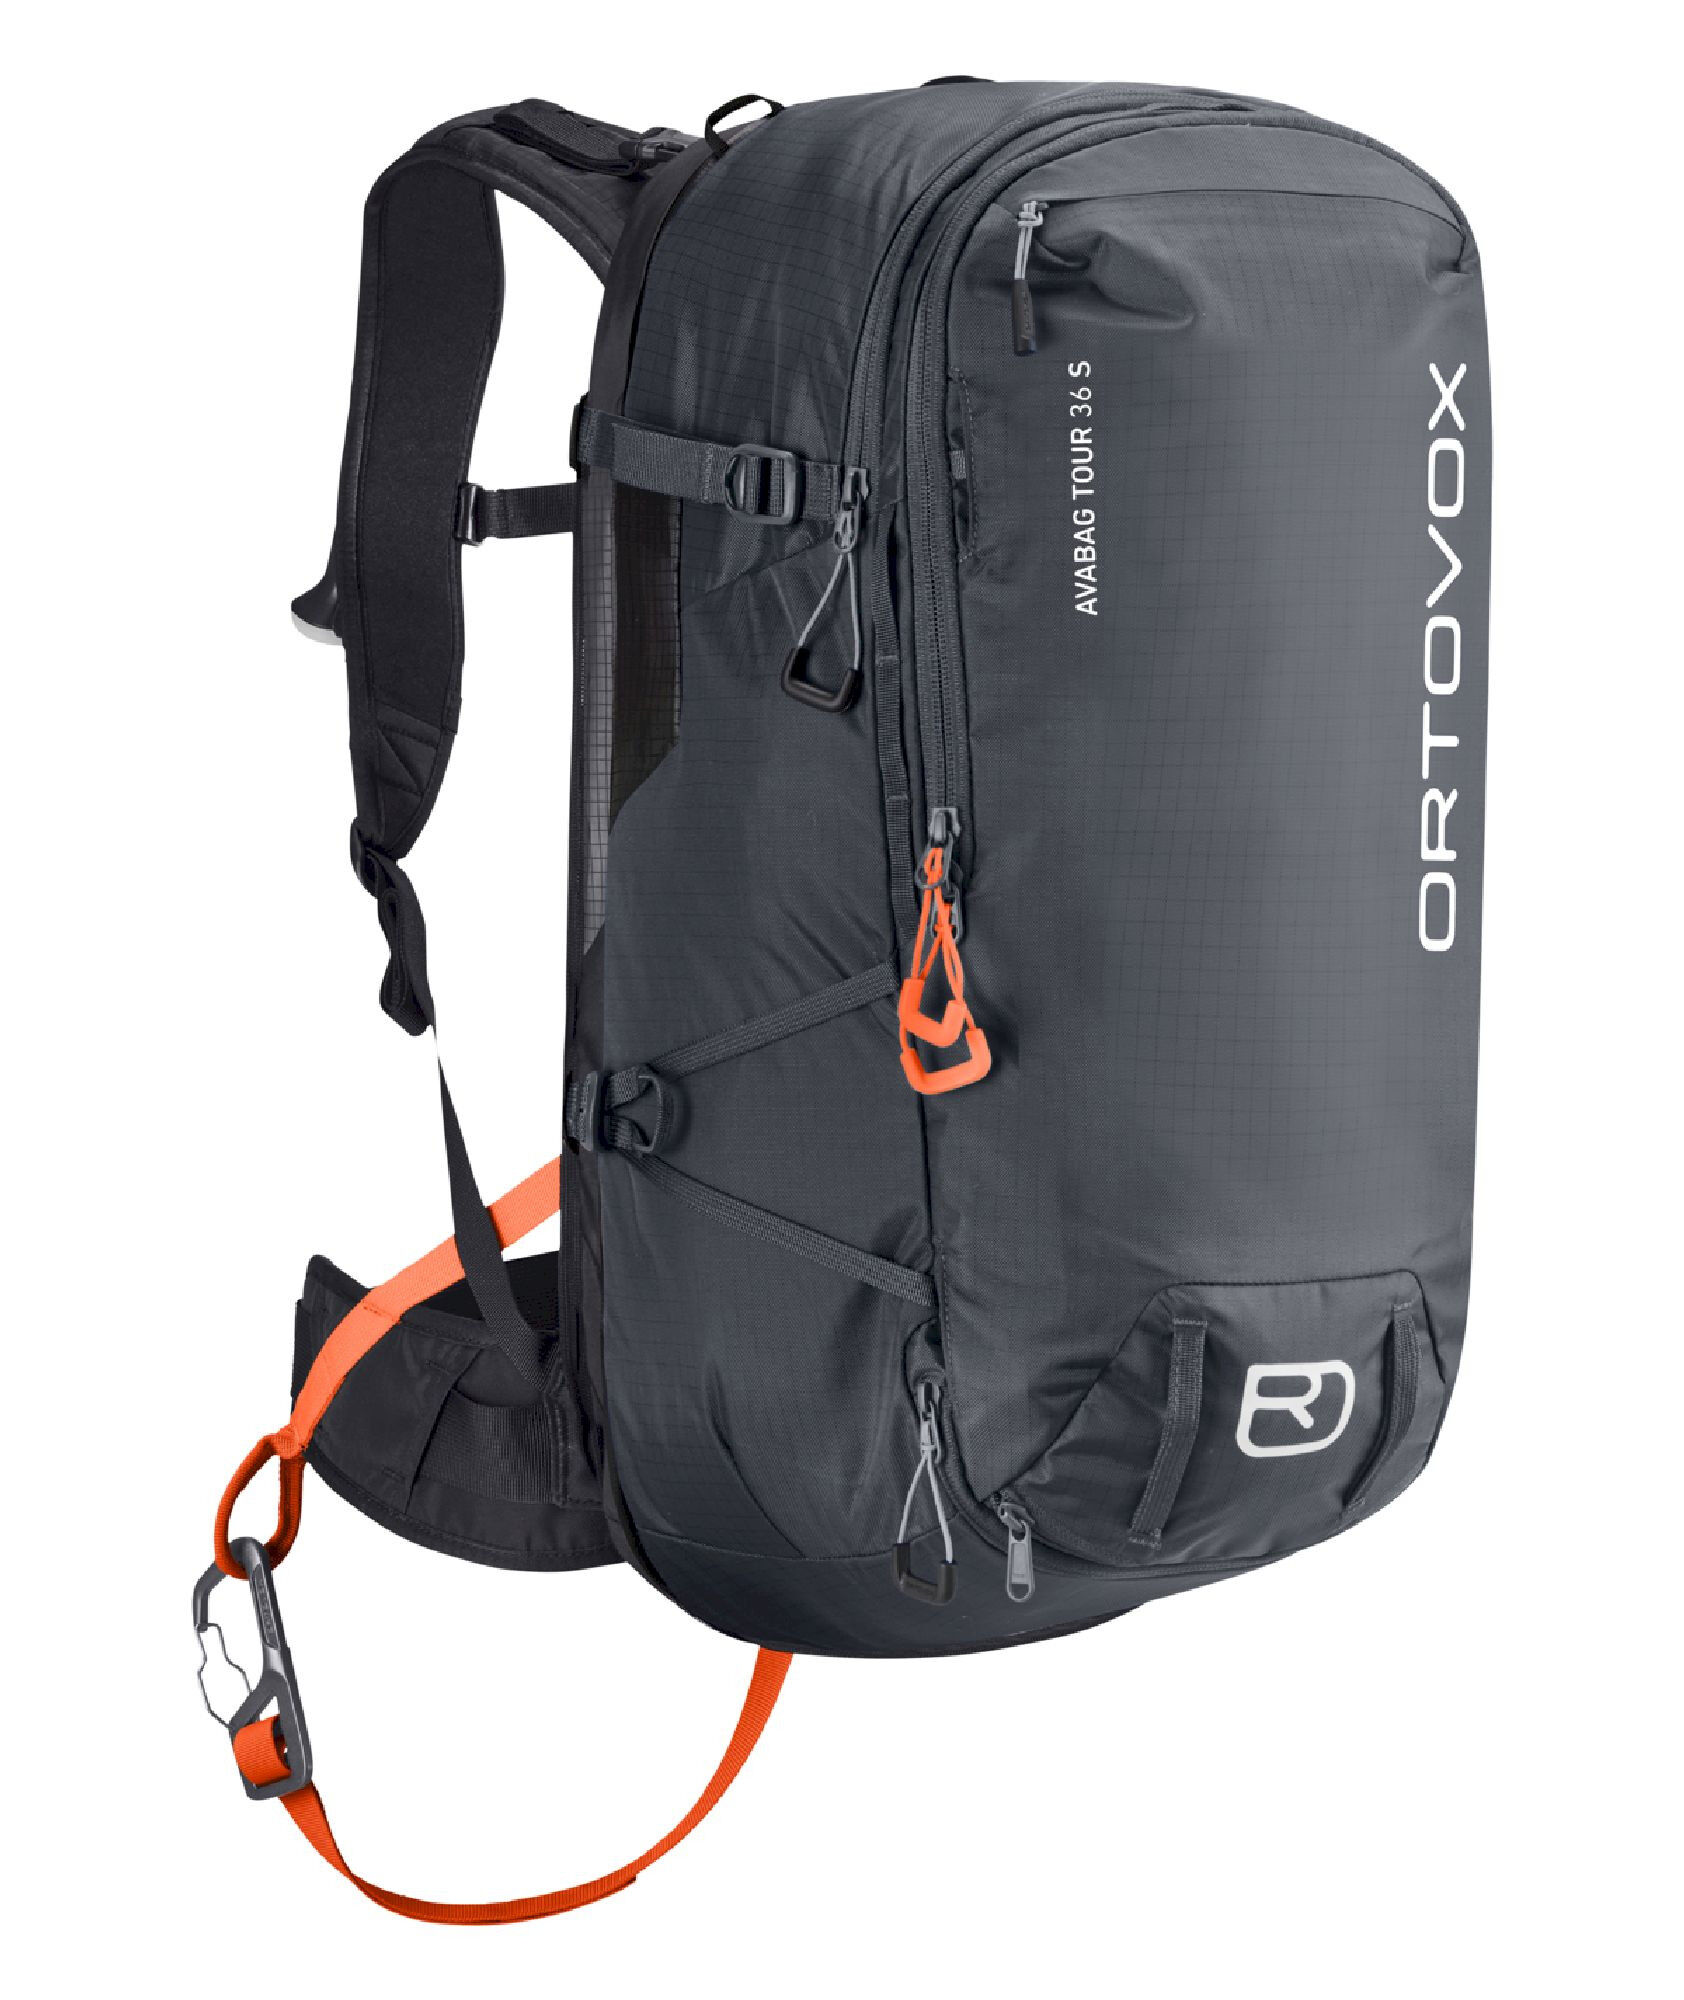 Ortovox Avabag Litric Tour 36 S - Avalanche airbag backpack | Hardloop